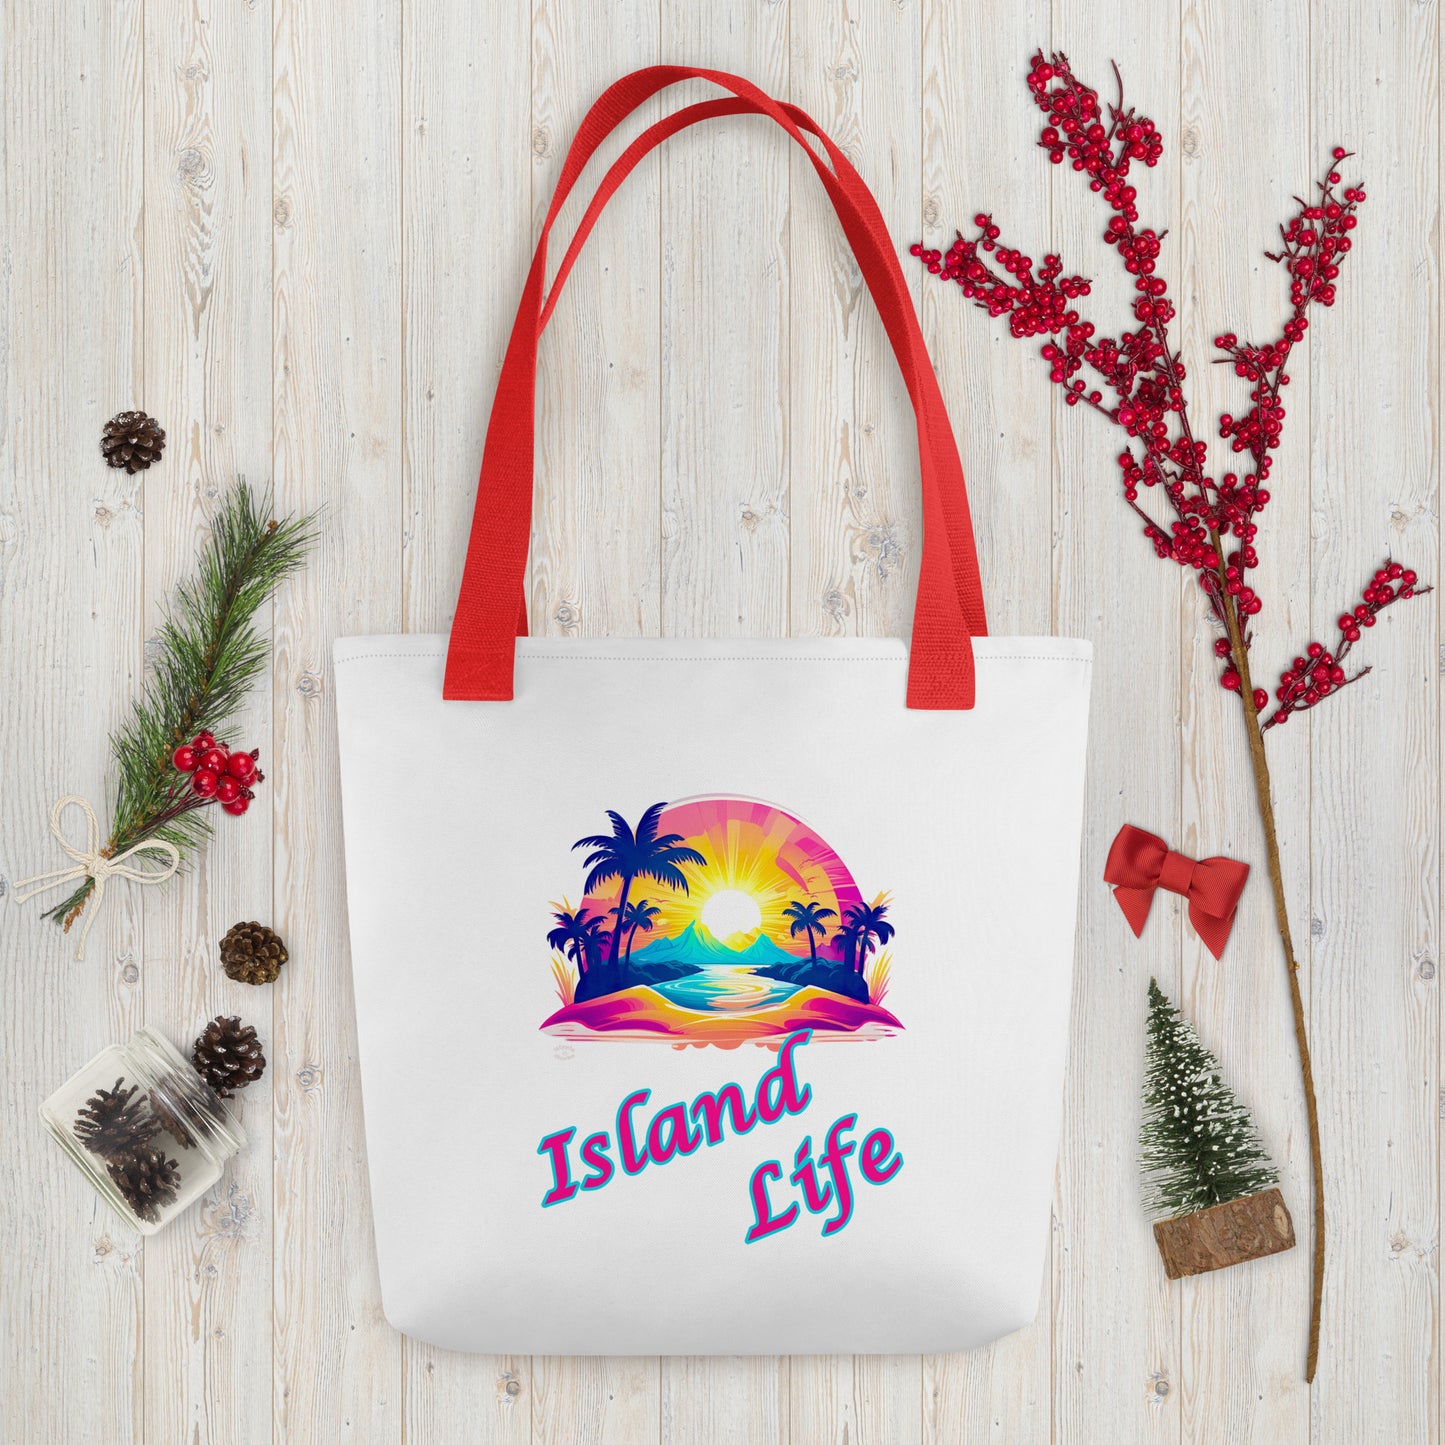 A picture of a Island Life Tote bag with a large picture of a tropical island paradise and the text Island Life underneath - red handles